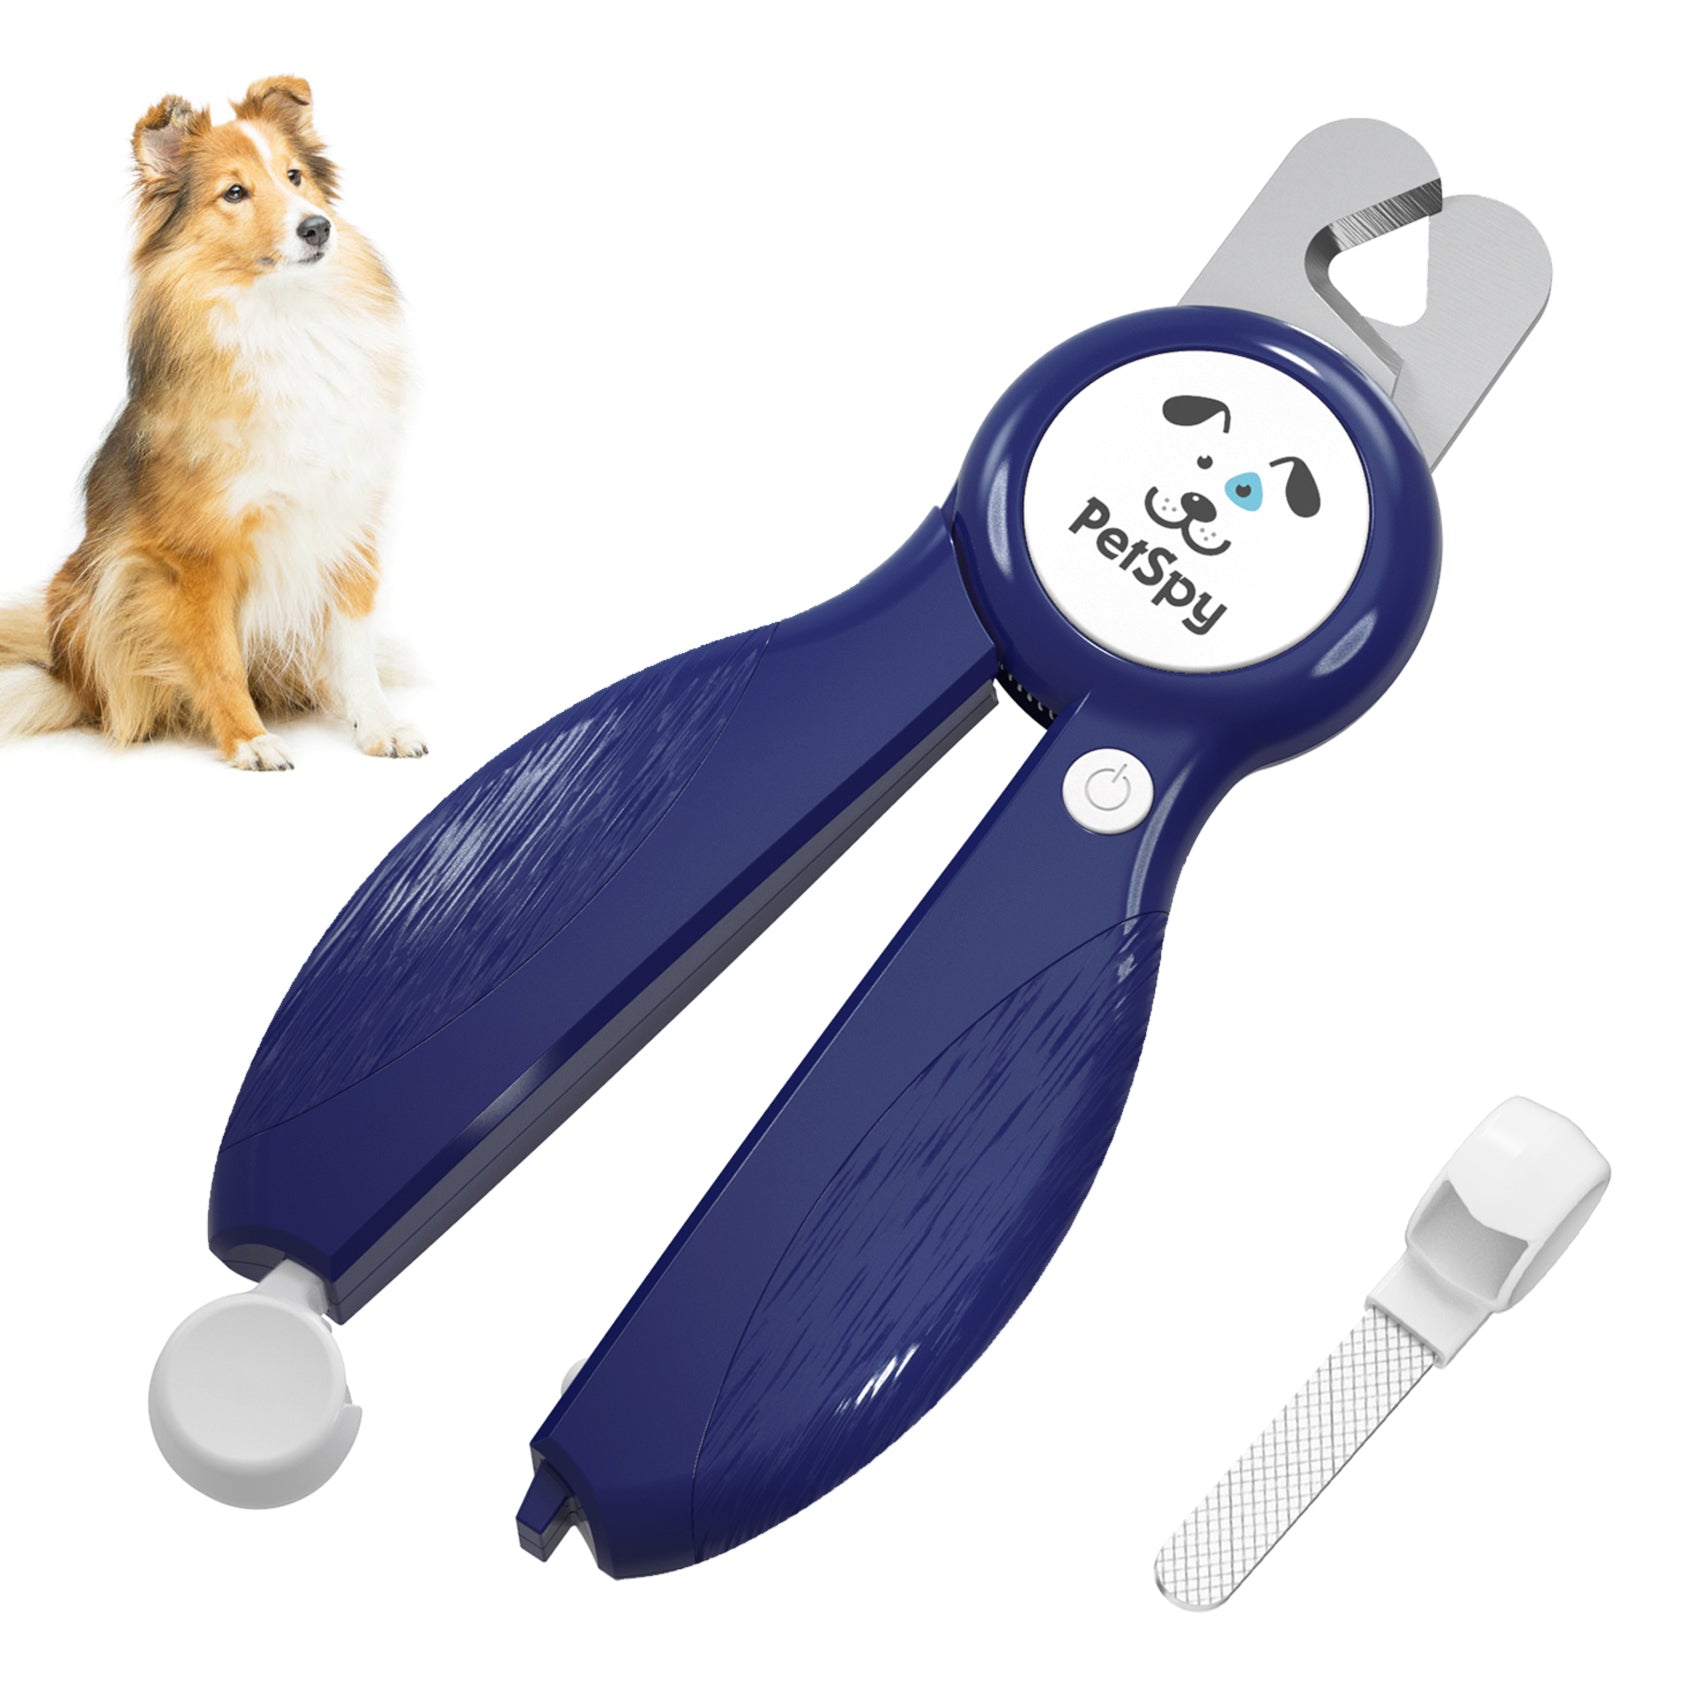 The Best Dog Nail Clippers for Your Dog – Petzyo